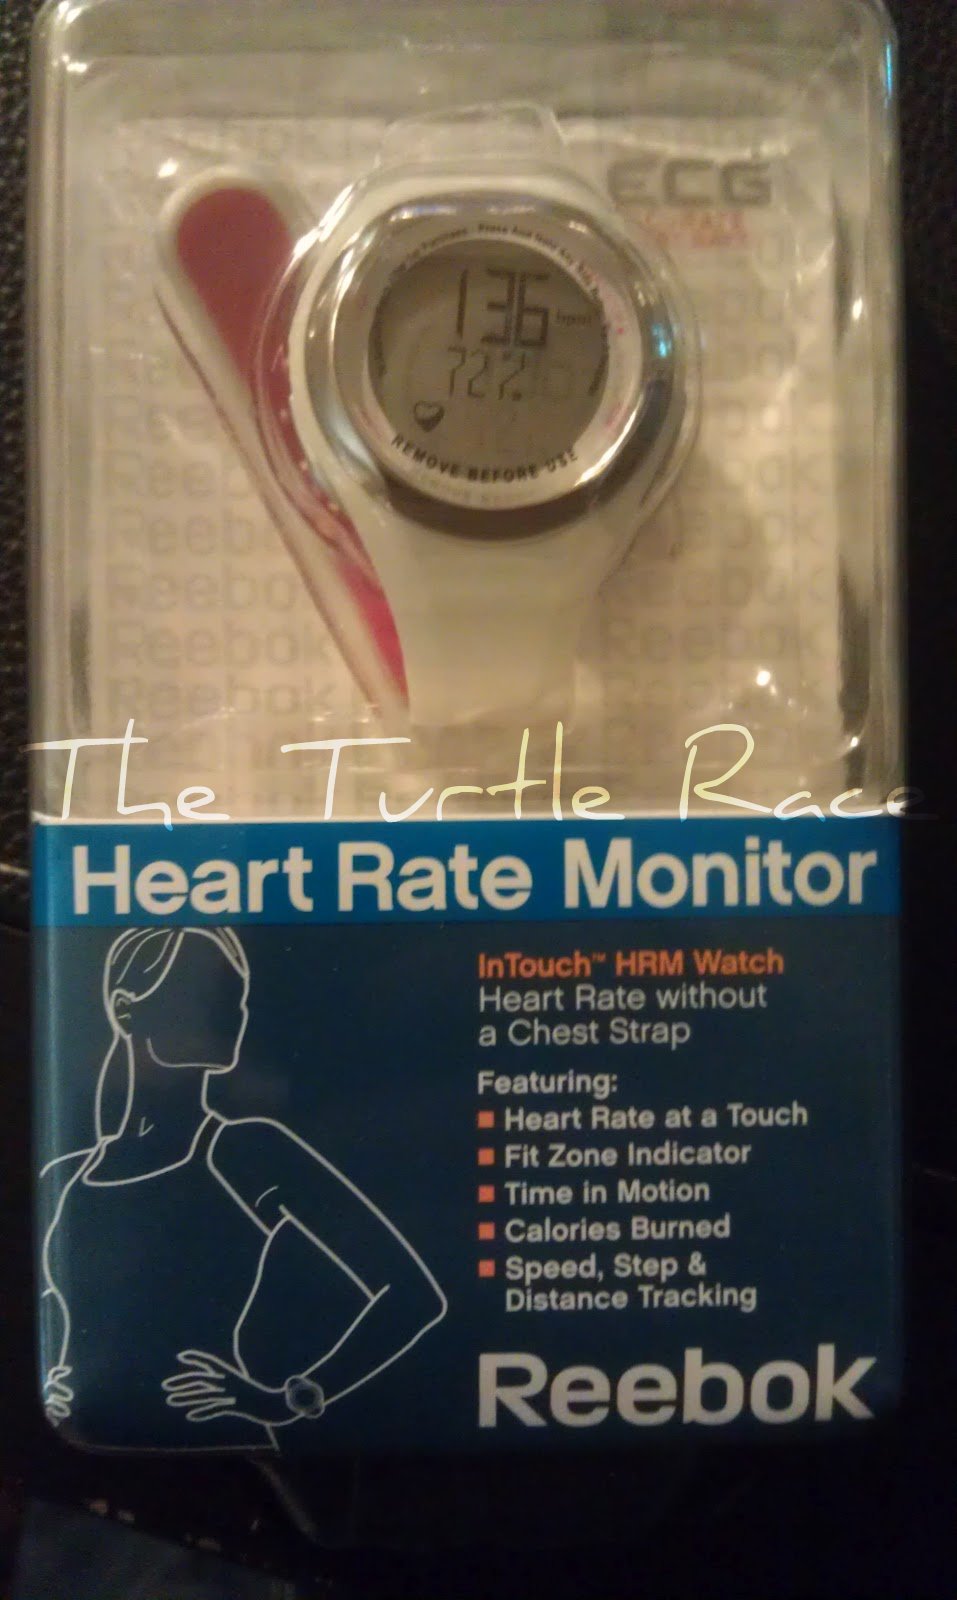 The Reebok inTouch Heart Rate Monitor Watch | The Turtle Race